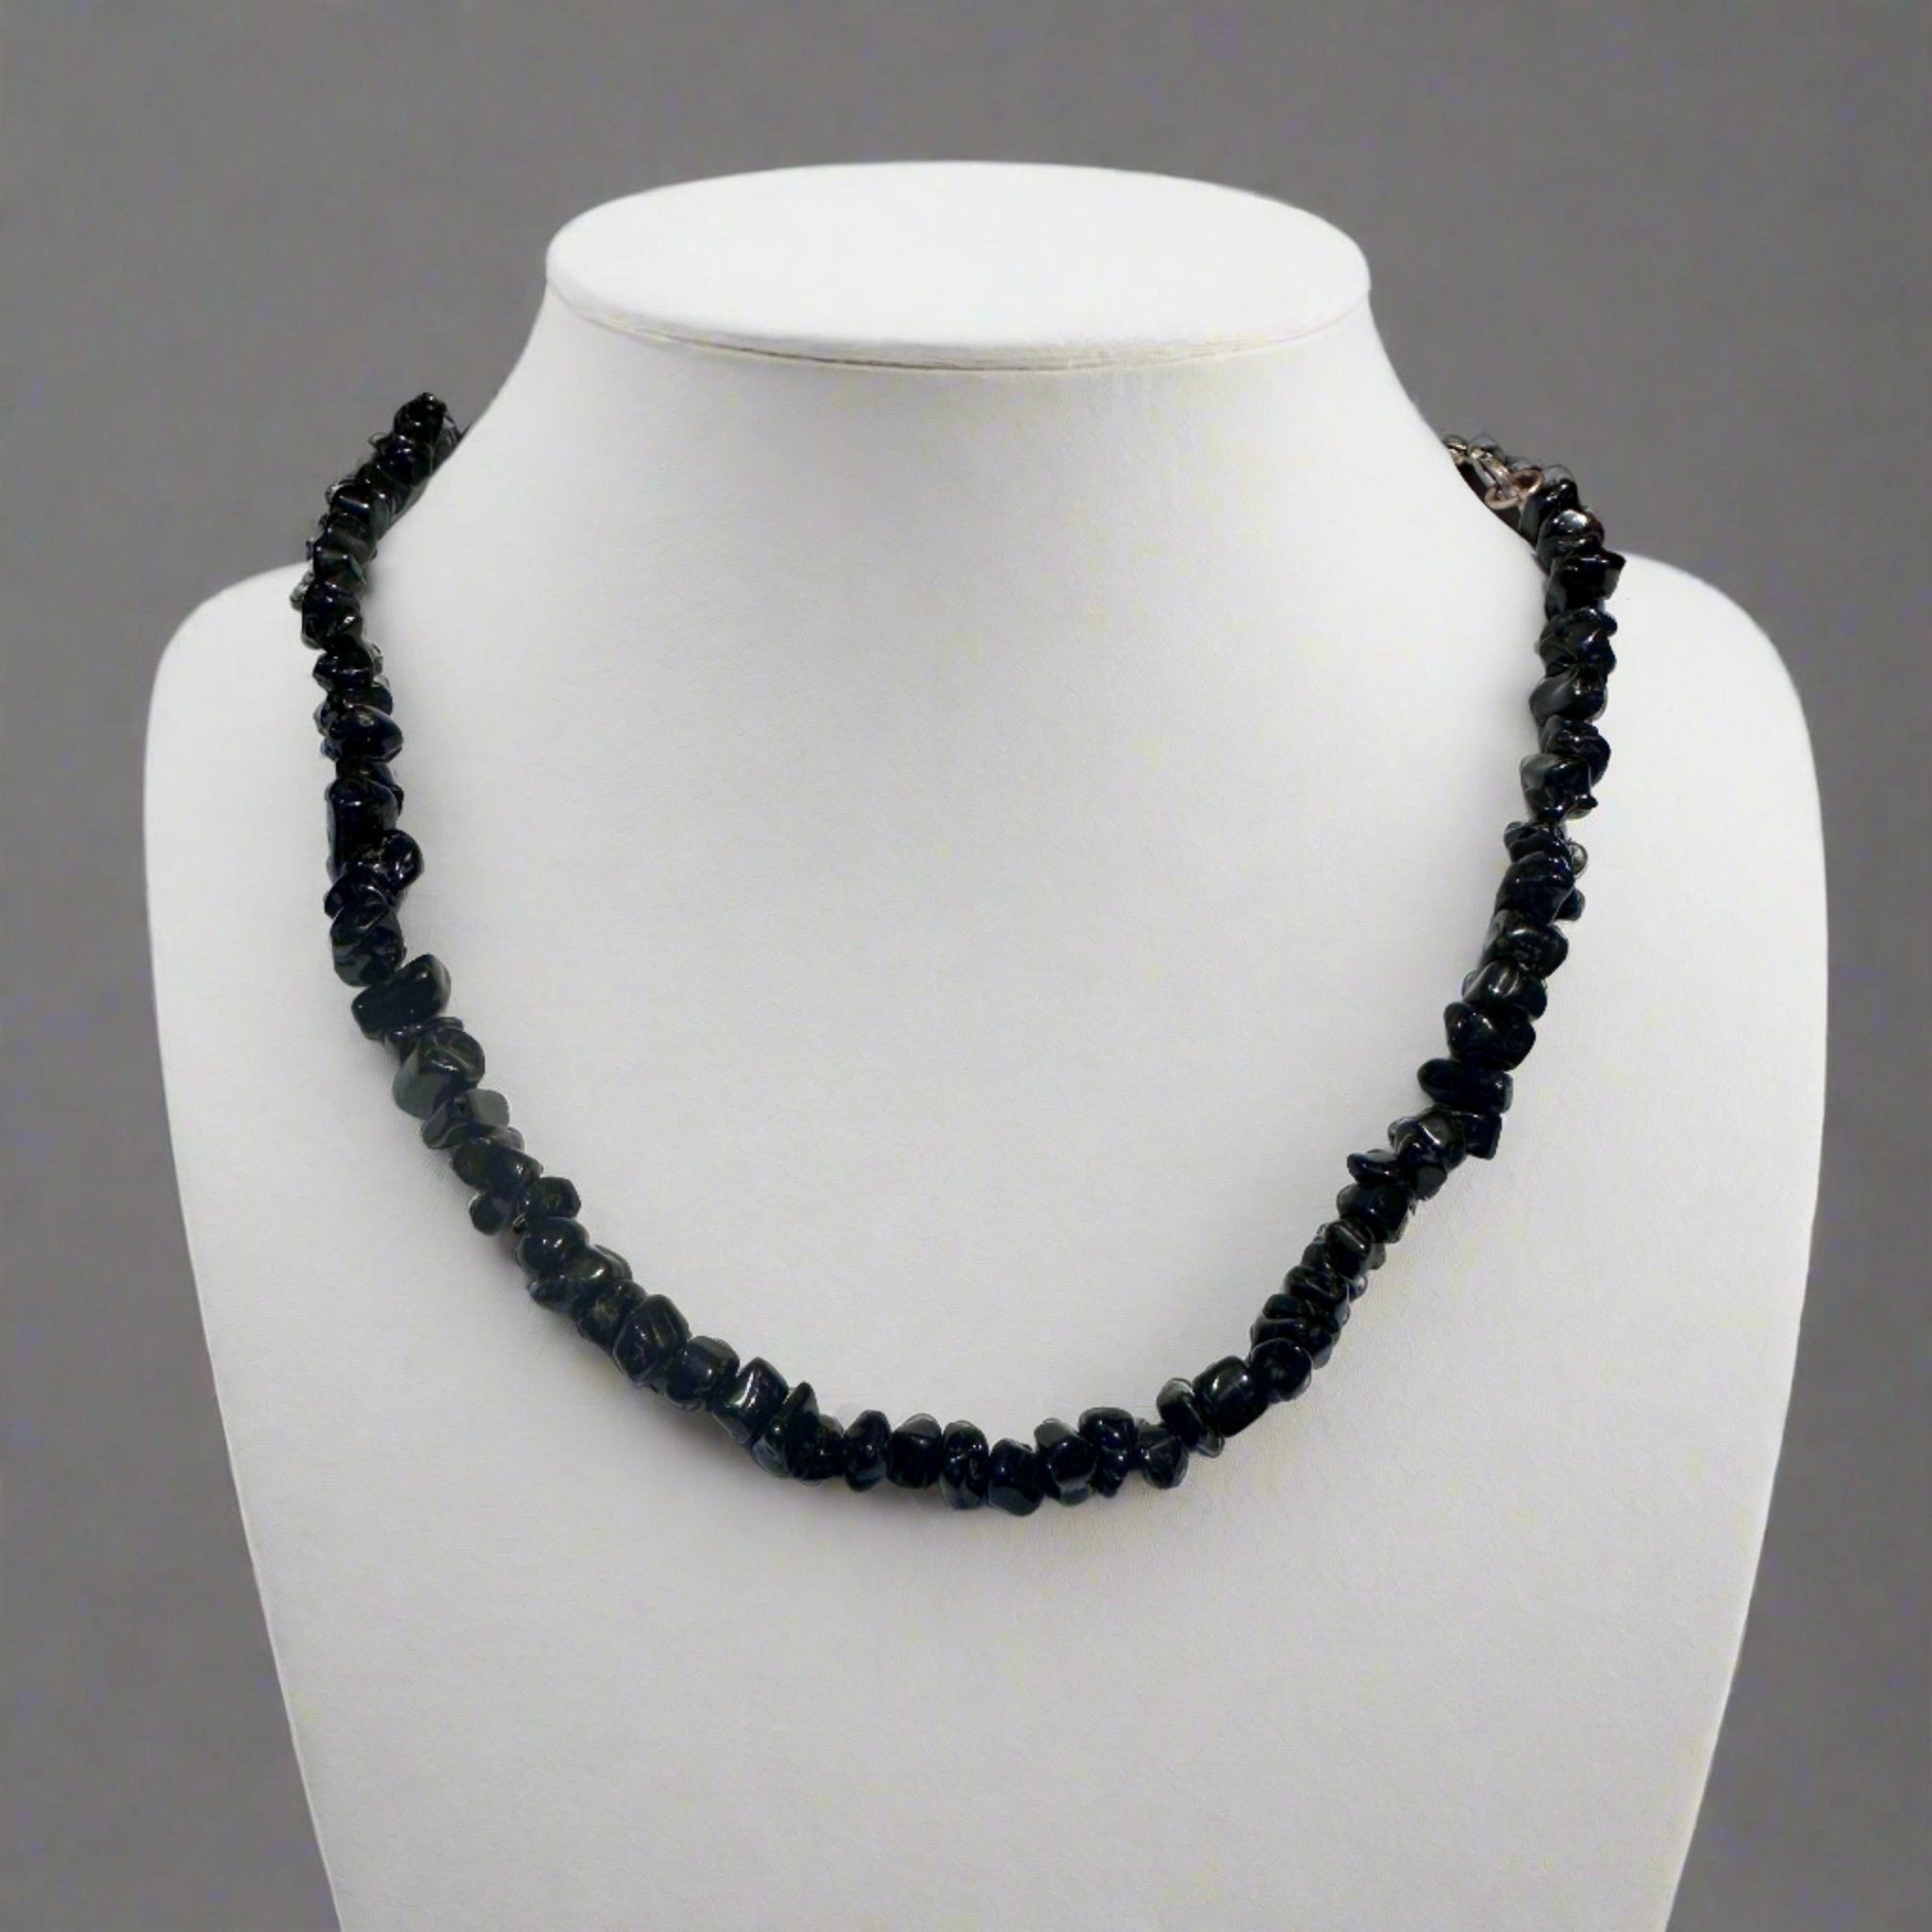 18-Inch Black Tourmaline Chip Necklace with Sterling Clasp - Sacred Crystals Chains and Necklaces